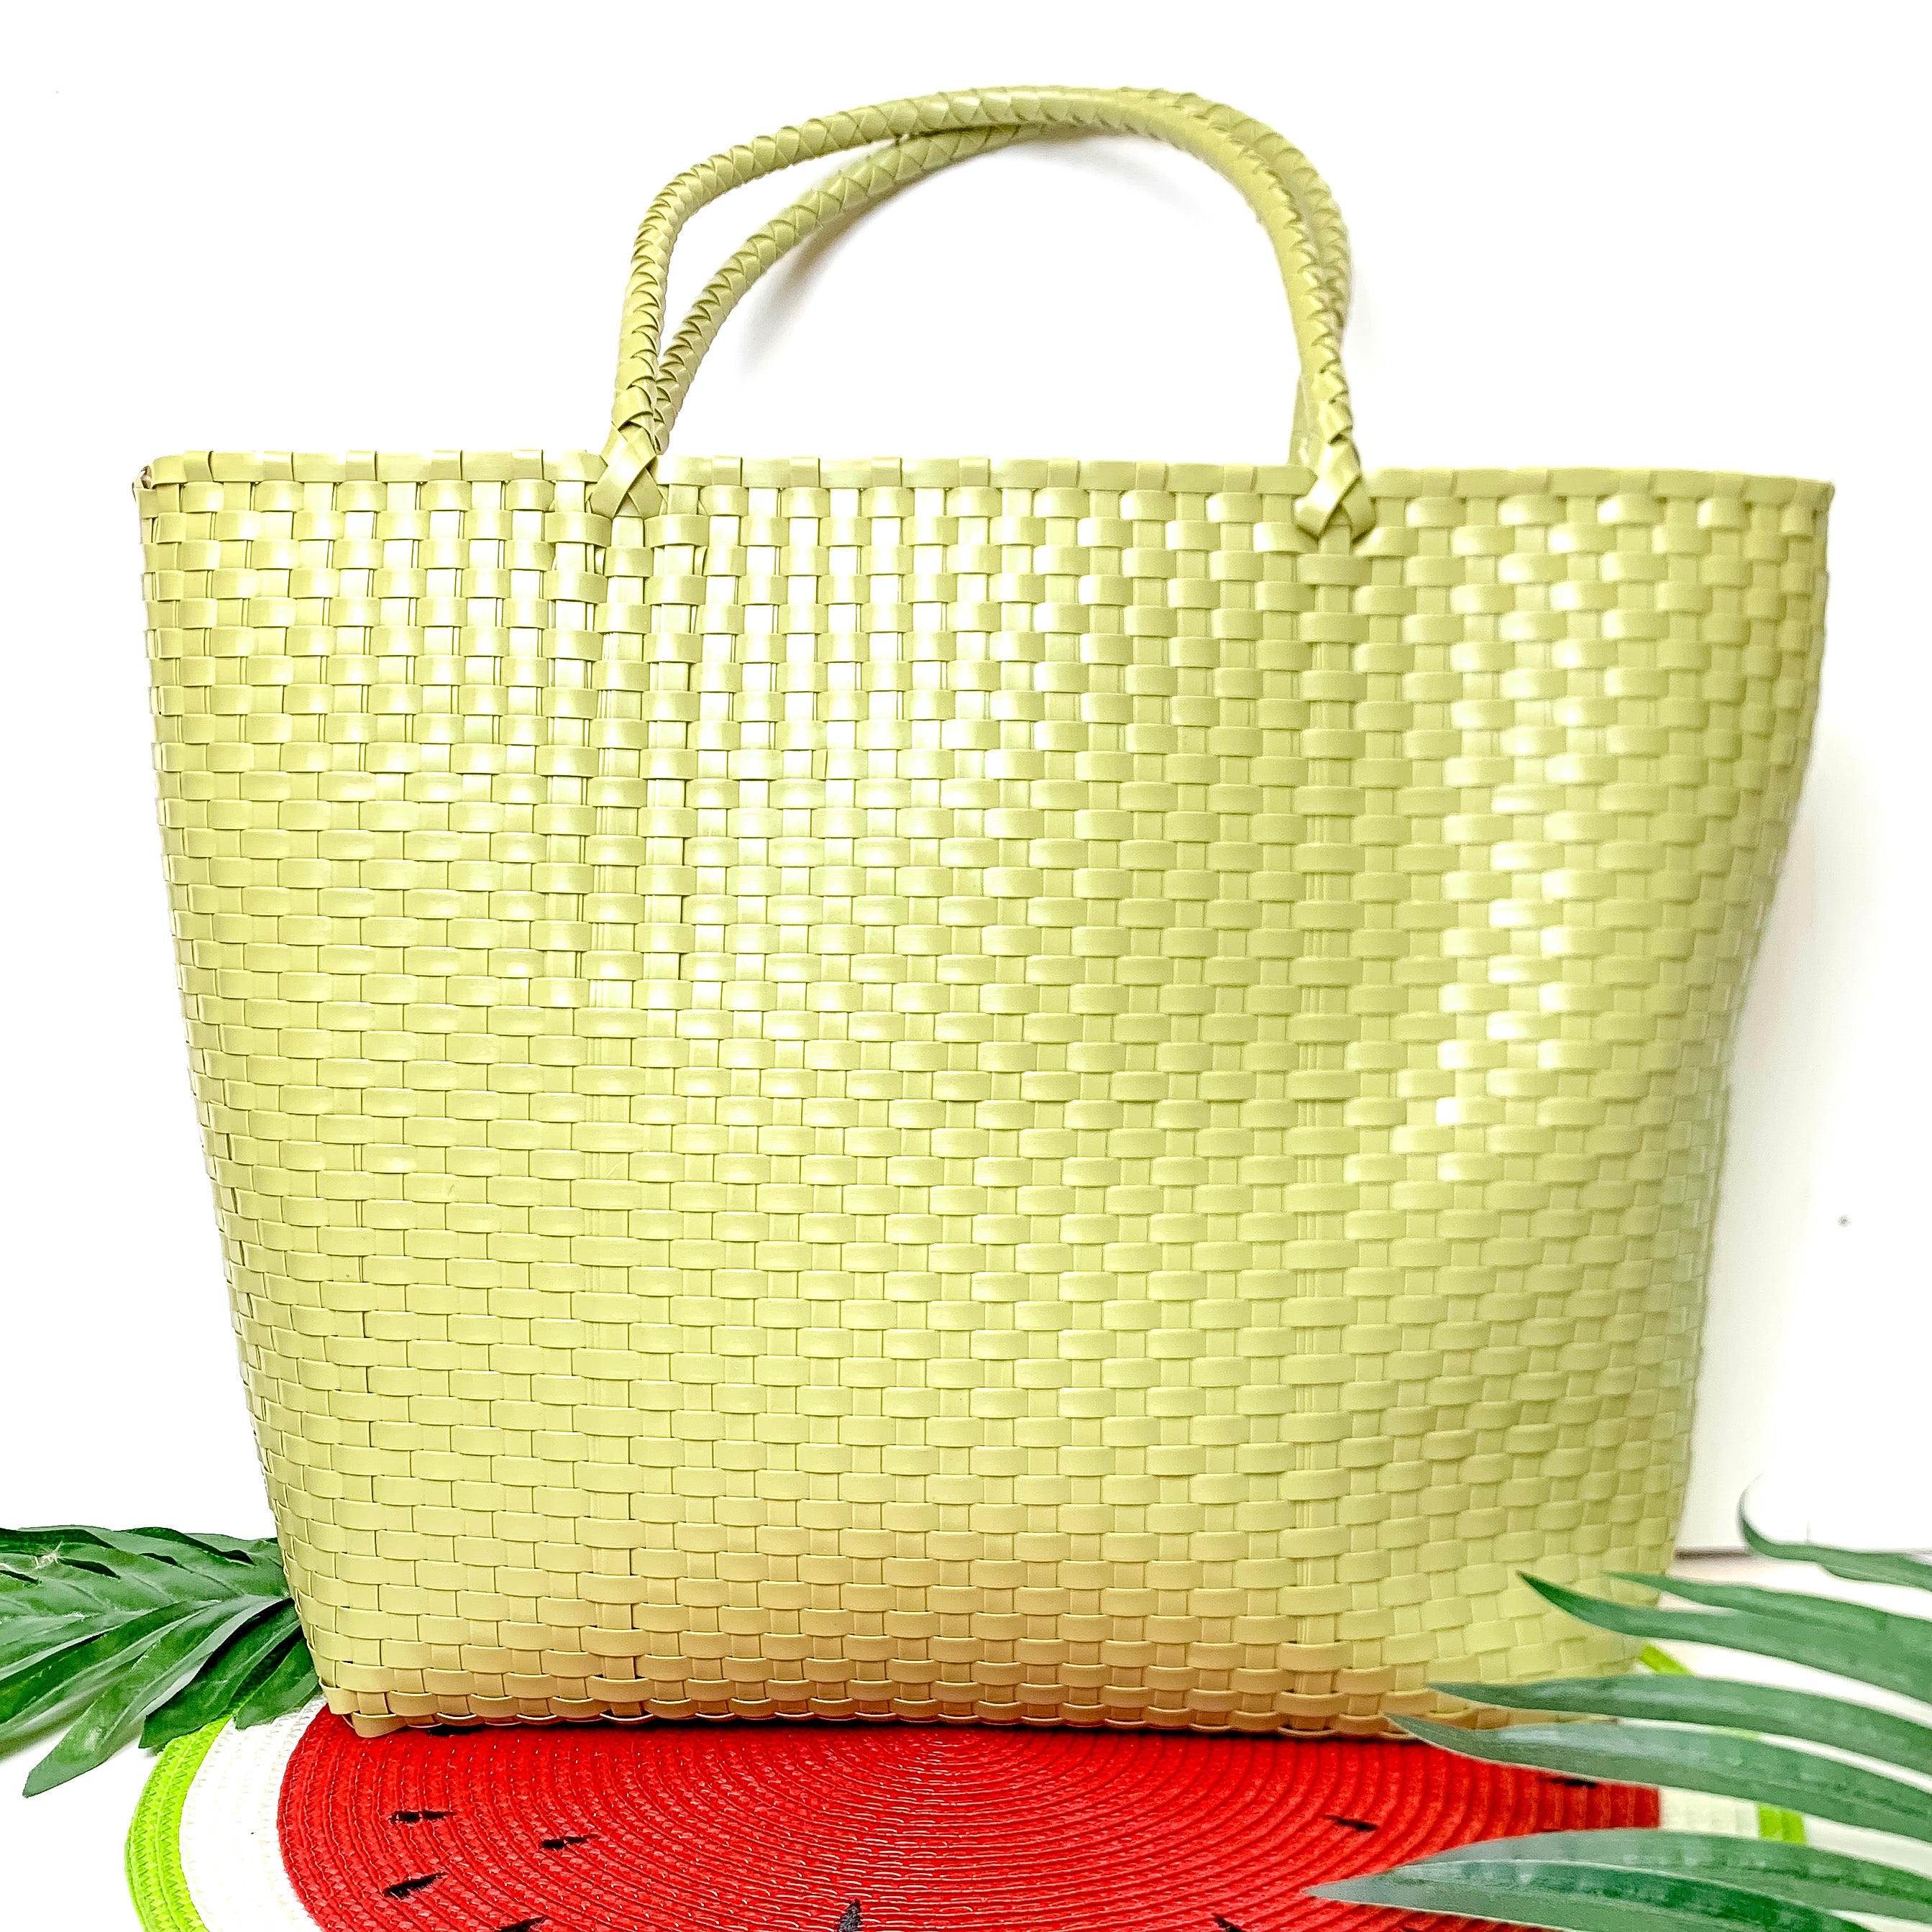 Coastal Couture Carryall Tote Bag in Sage Green - Giddy Up Glamour Boutique